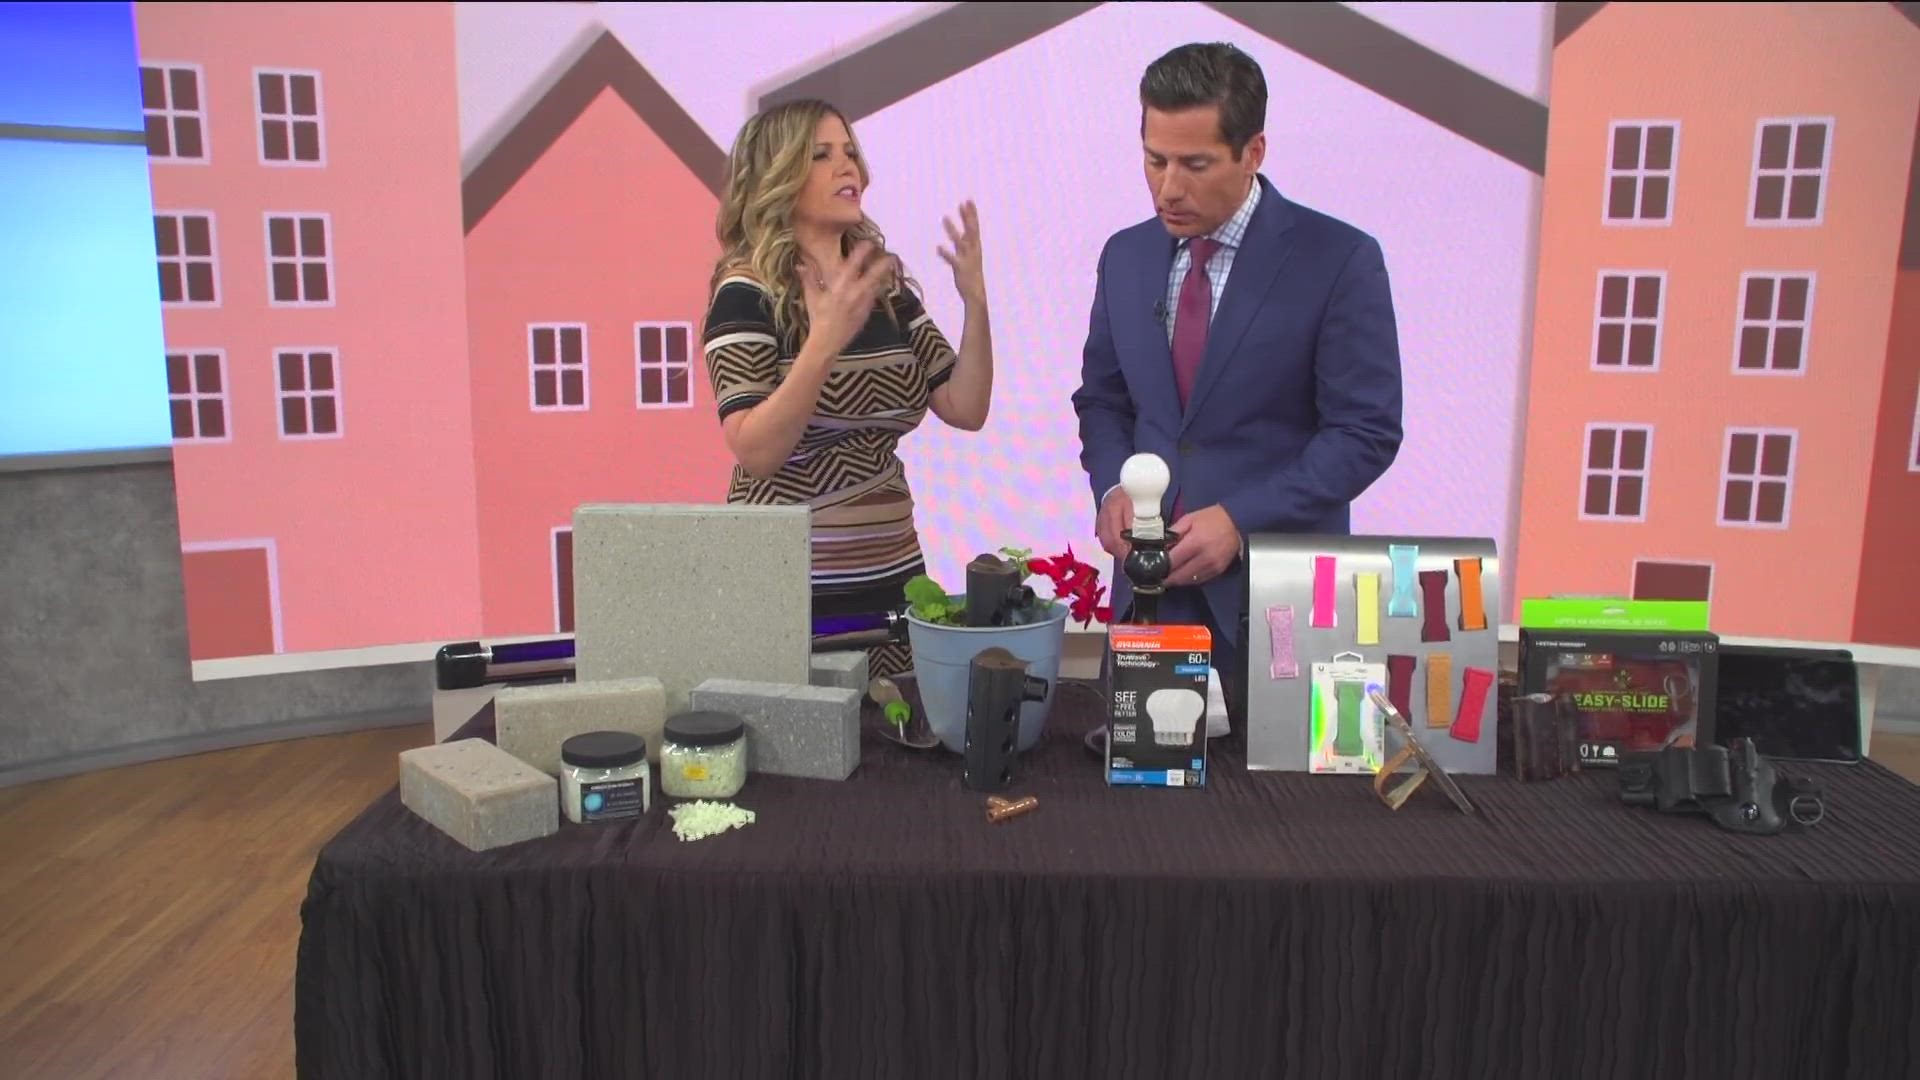 Connection, peace, and purpose are this year’s themes. Kathryn Emery showed what is trending in home products.